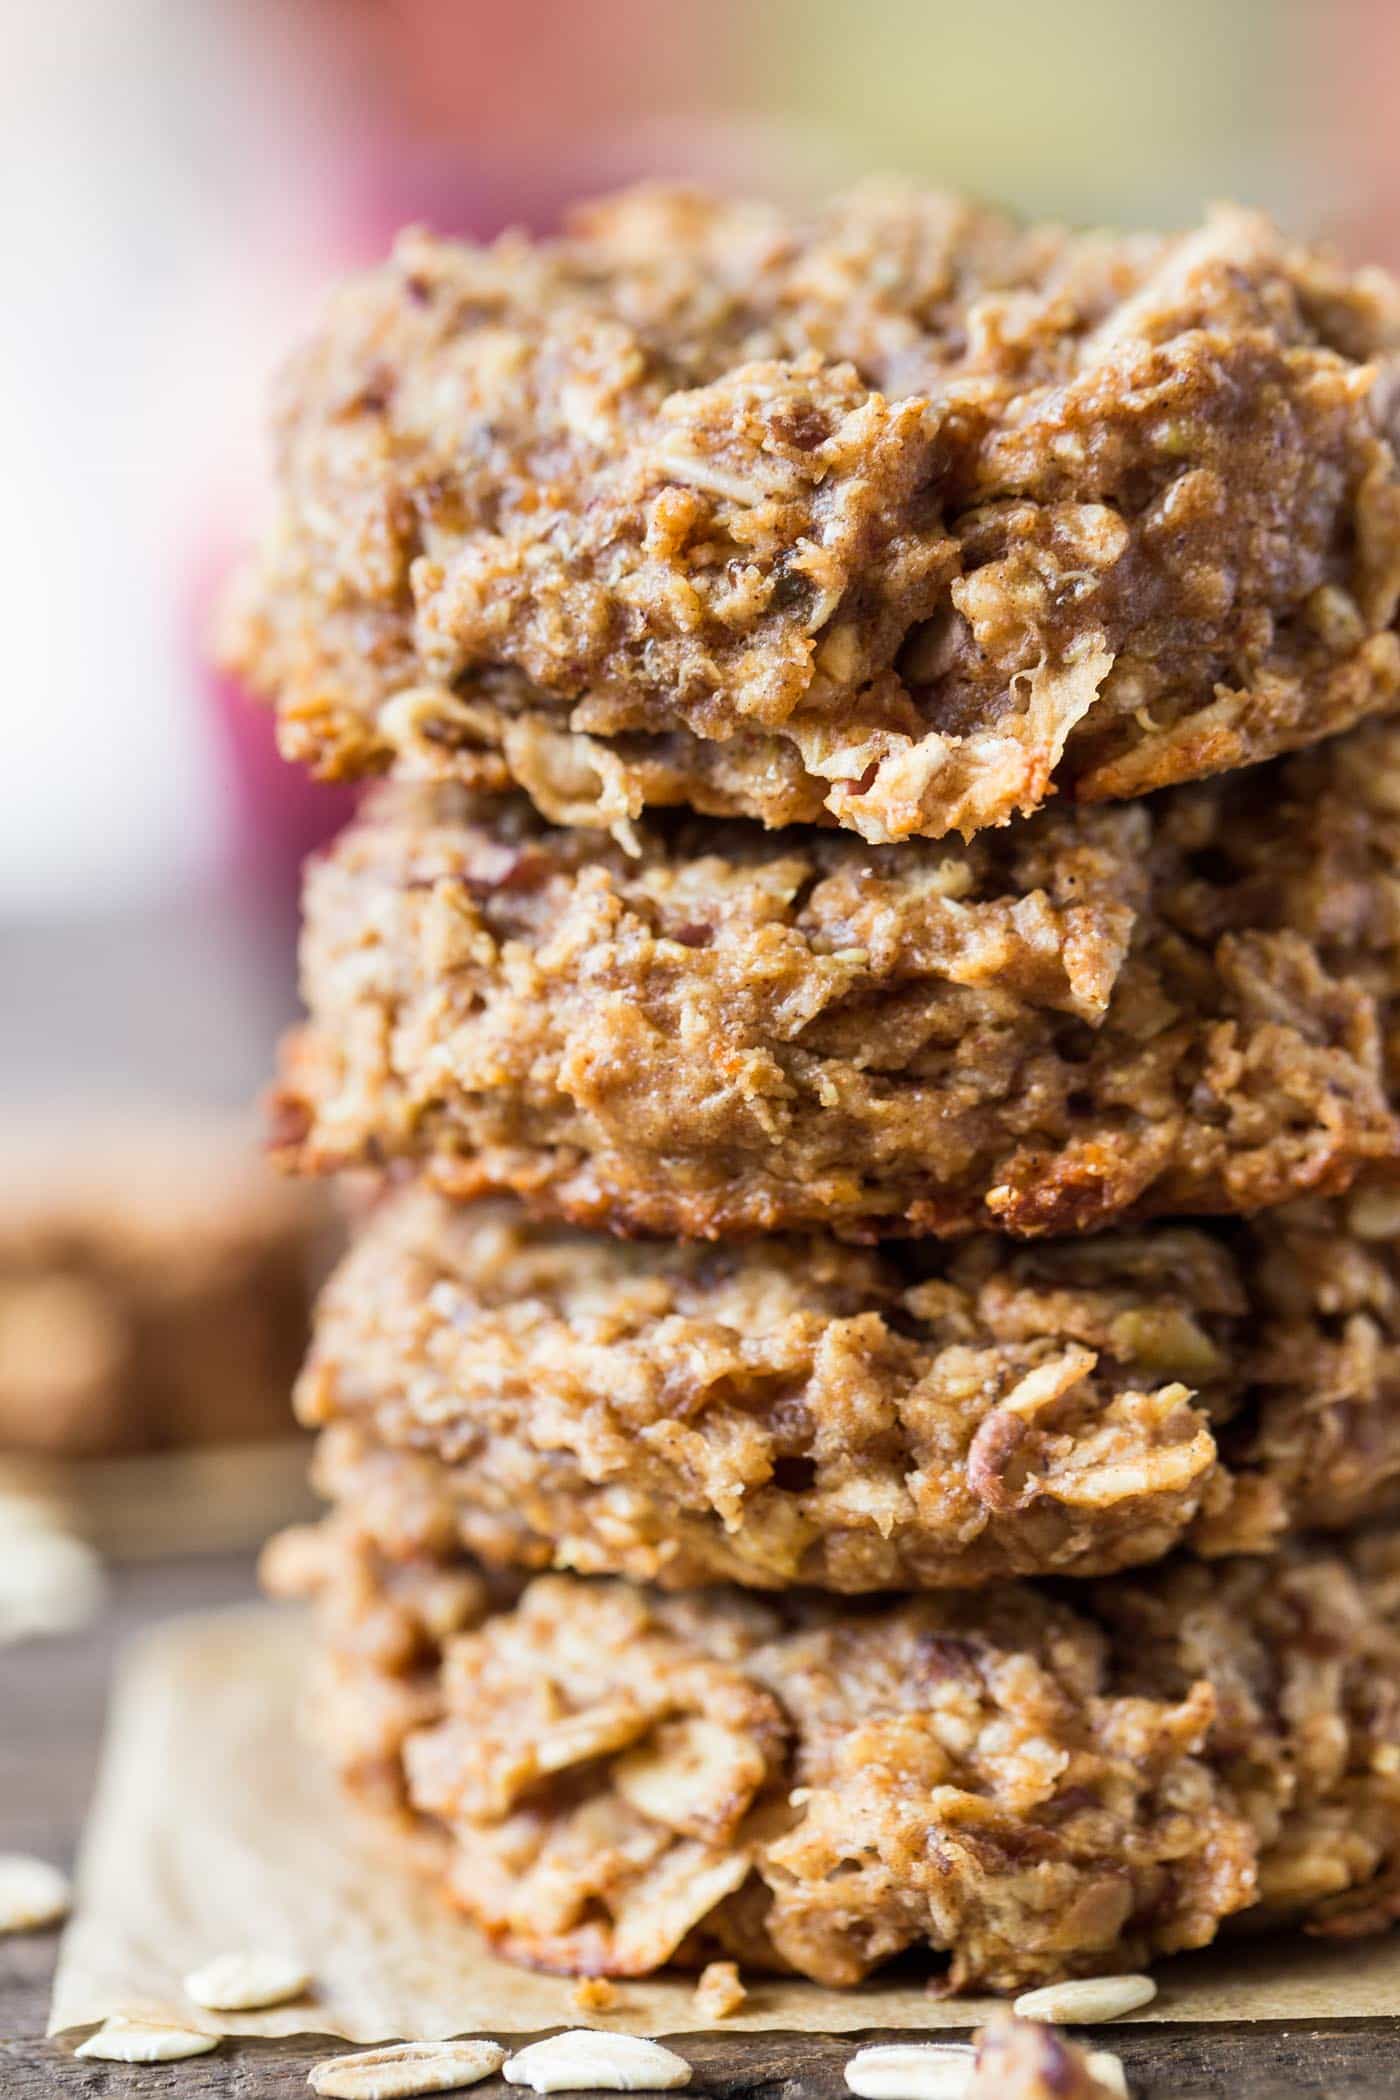 APPLE PIE QUINOA BREAKFAST COOKIES -- they taste like apple pie and are the perfect way to start your day!